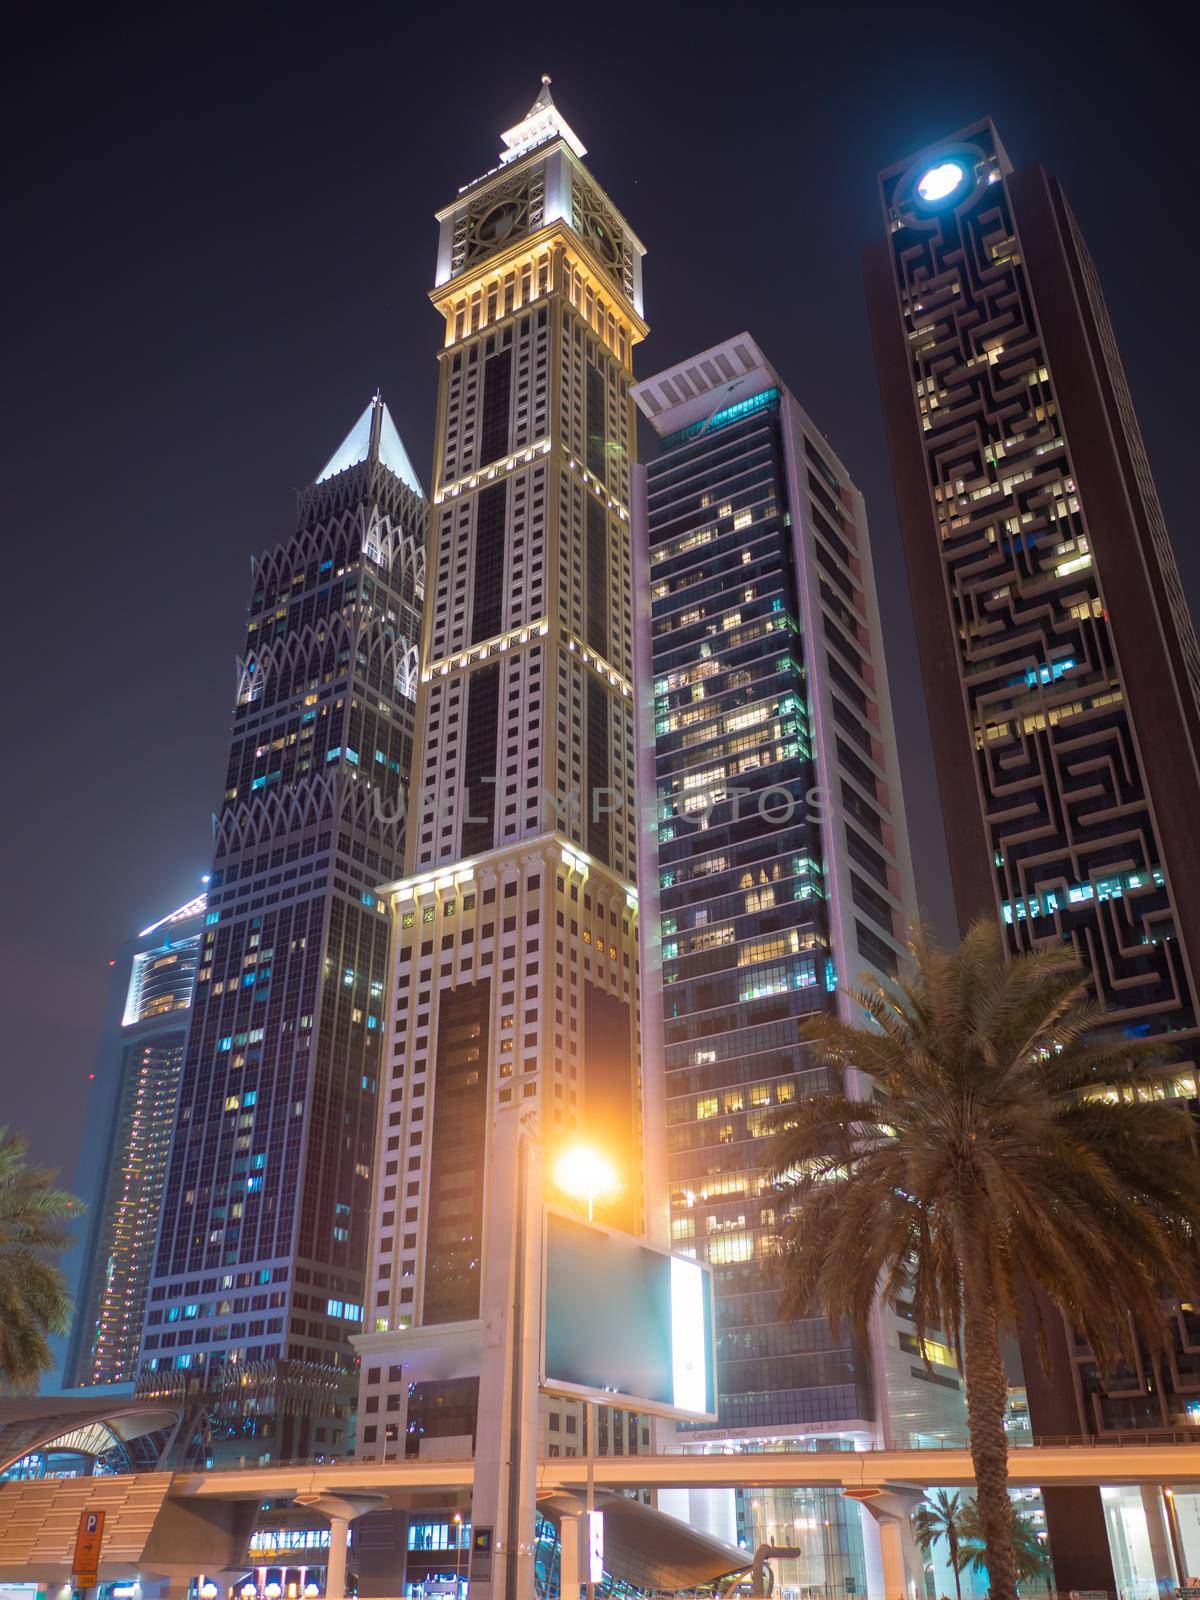 Night view of Dubai Downtown with skyscrapers. by DovidPro